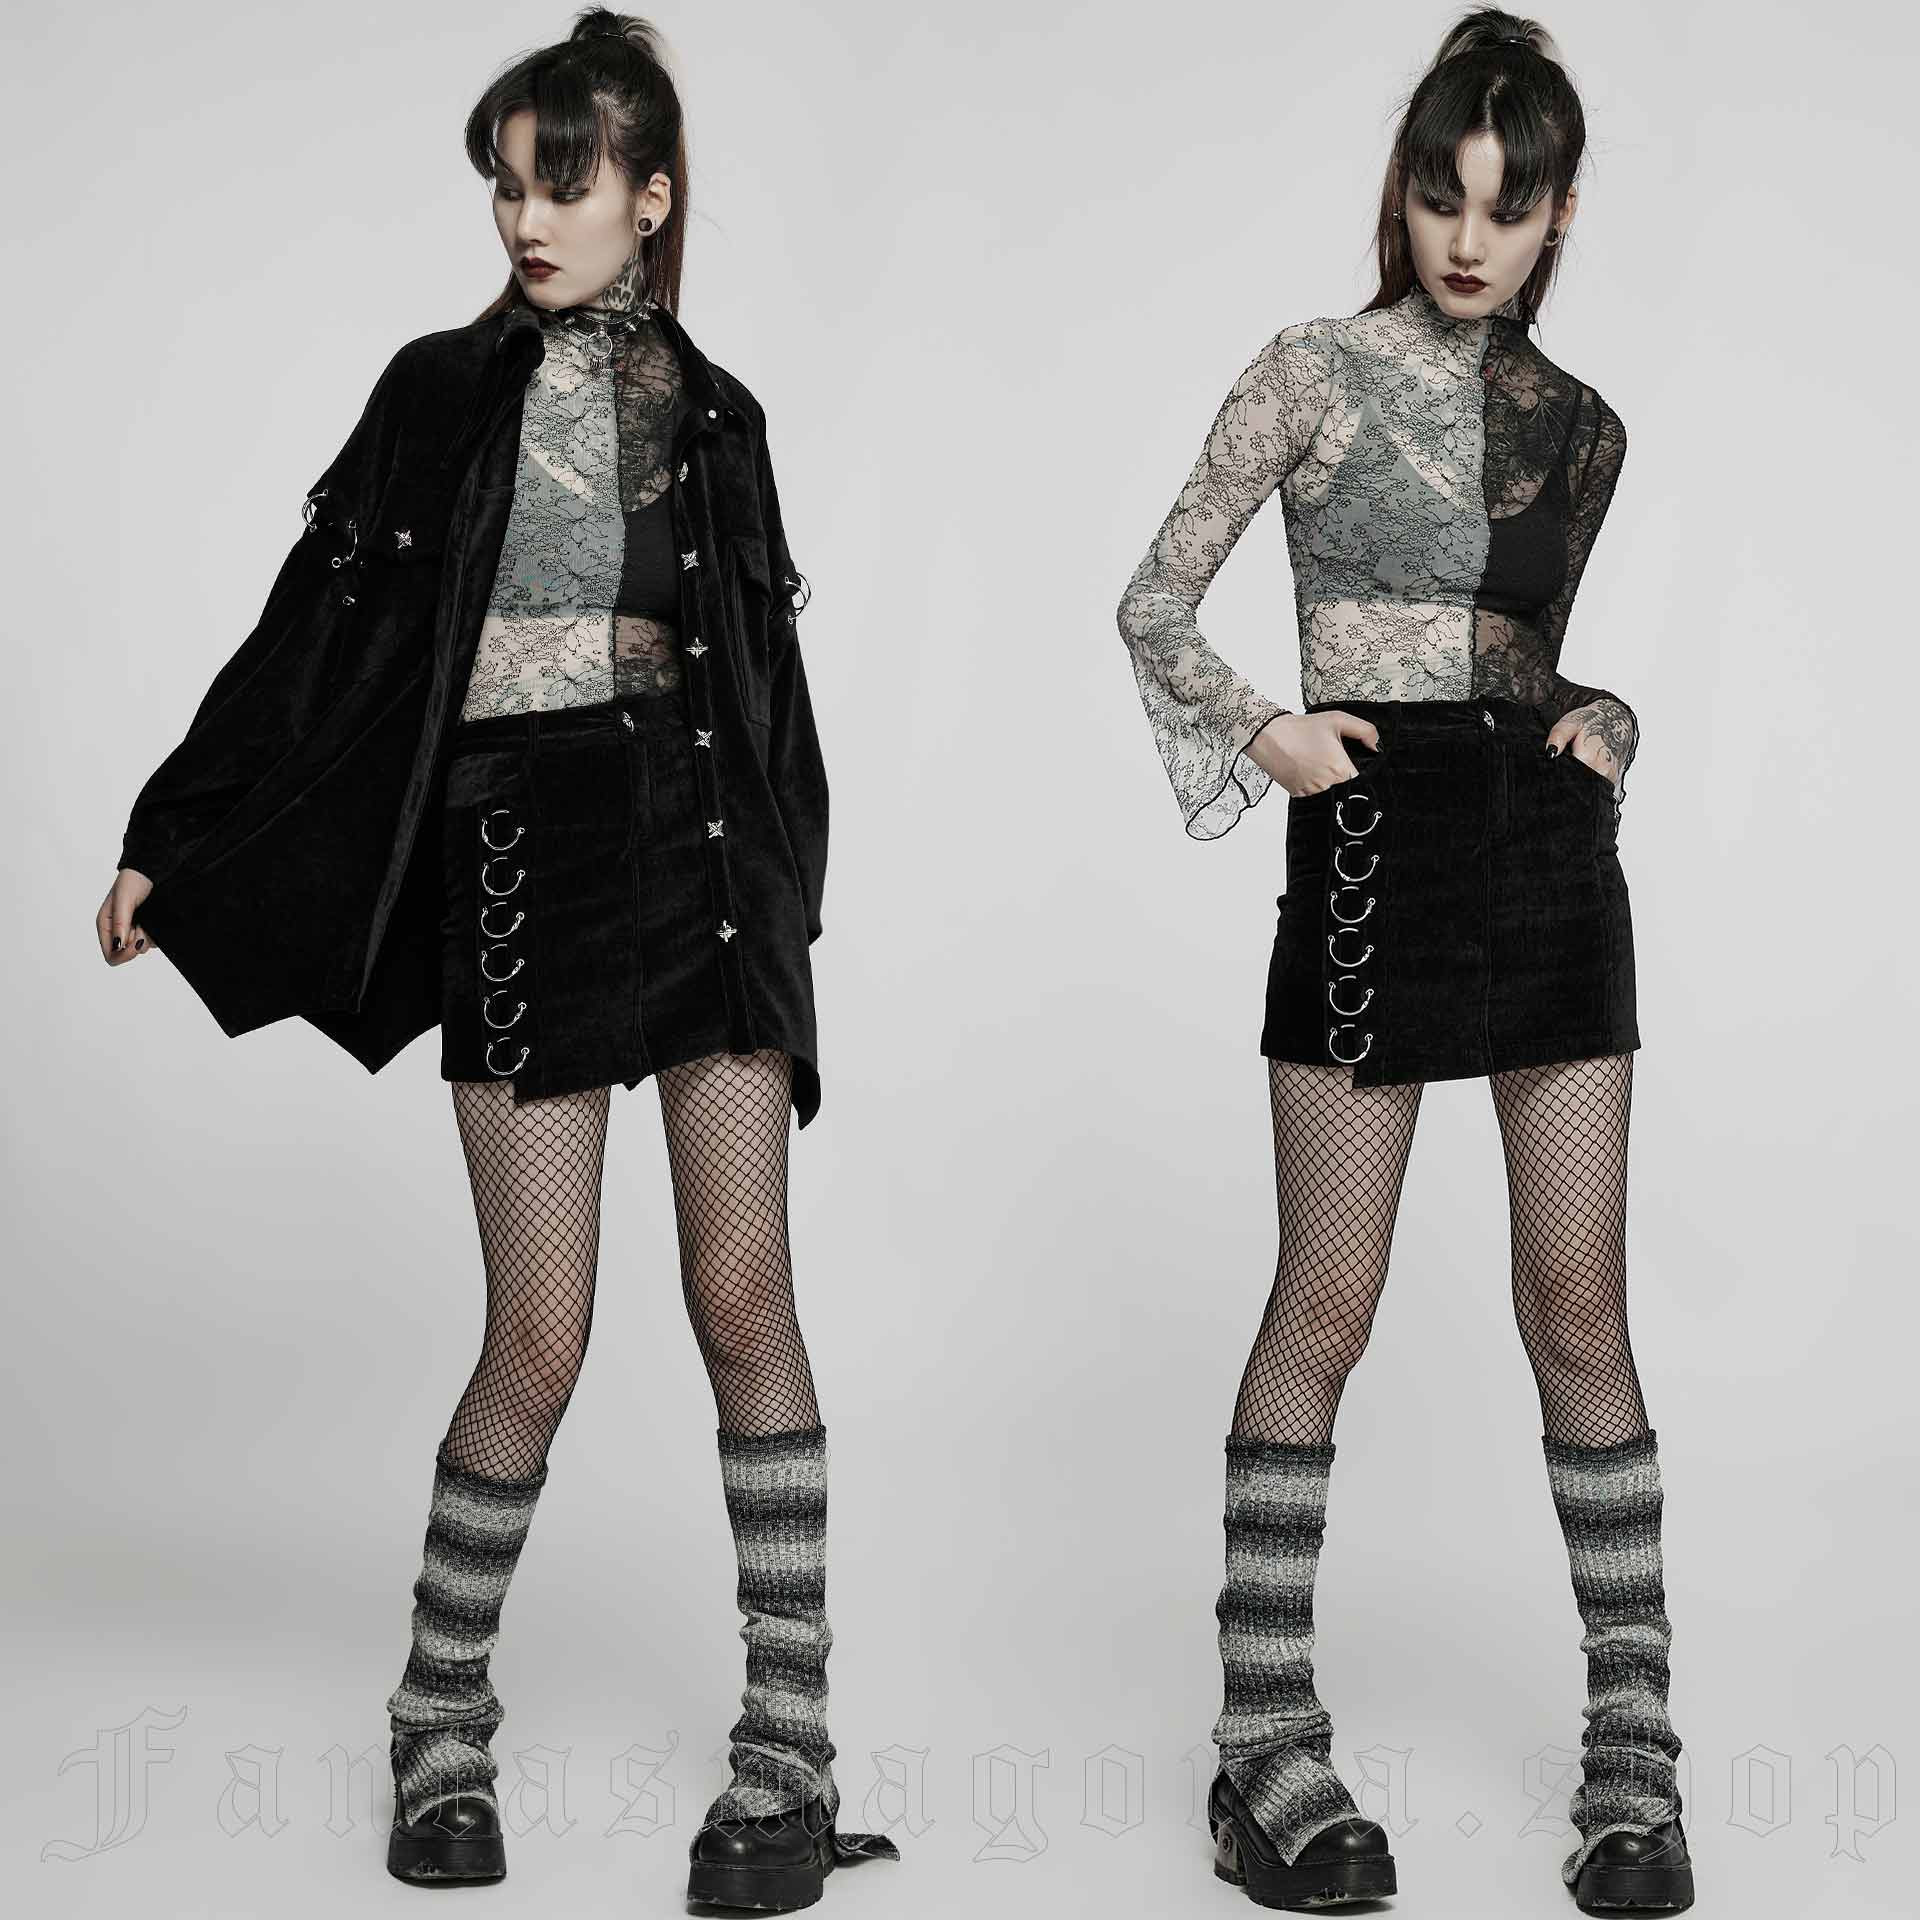 Alice Black and White Legwarmers by Punk Rave brand